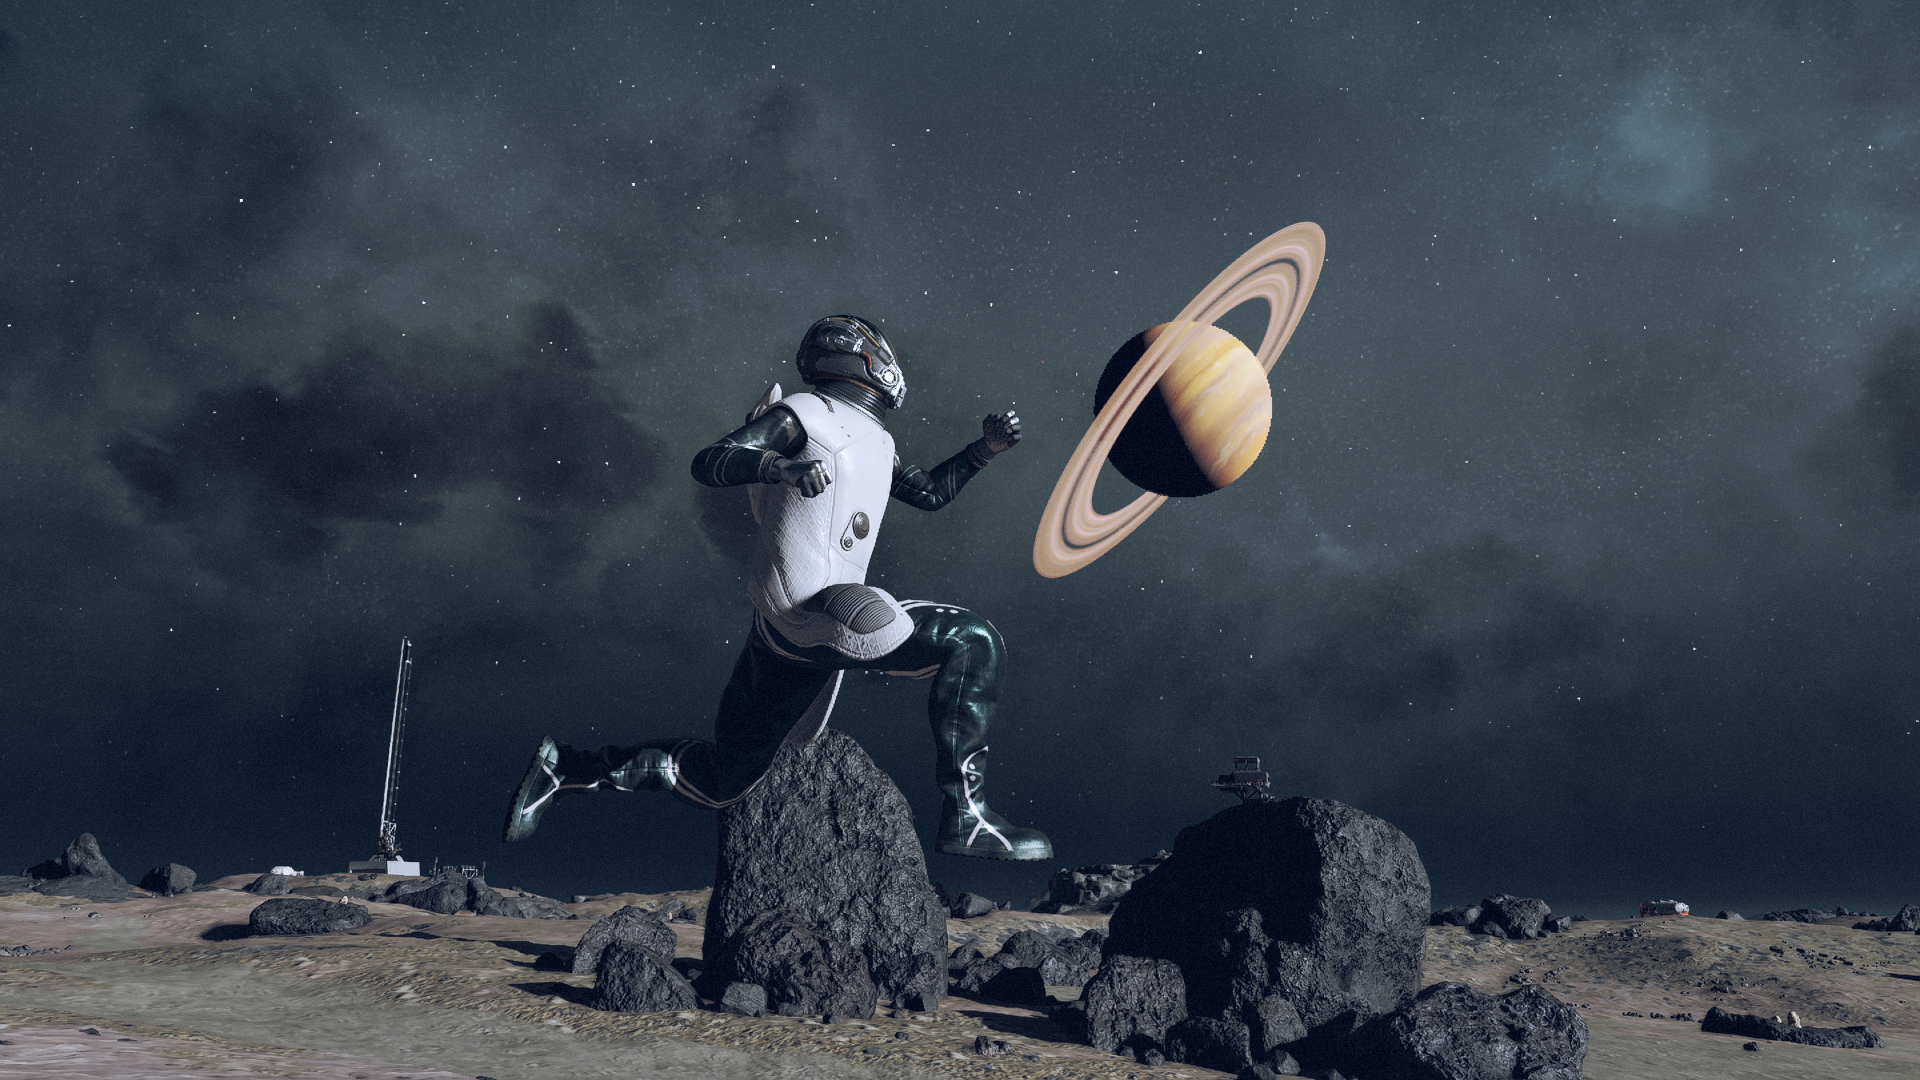 A player leaping into the sky on a barren moon in Starfield.